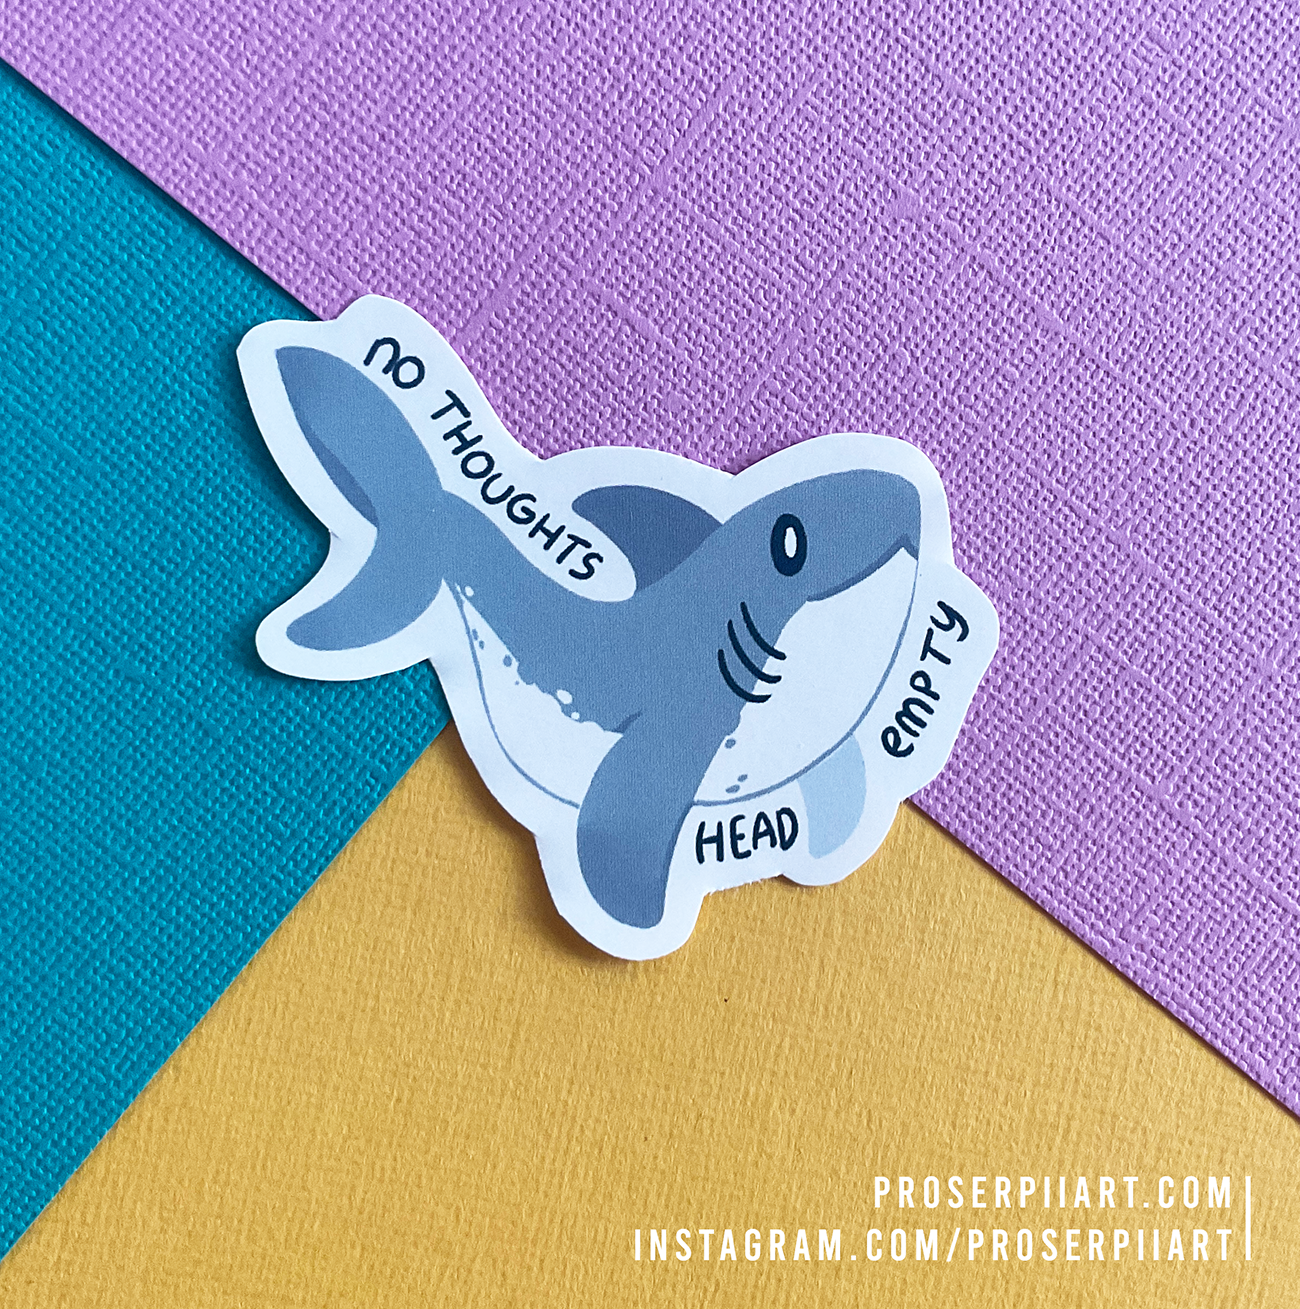 Shark Stickers! // Cute Sharks Sticker Pack // No Thoughts Head Empty